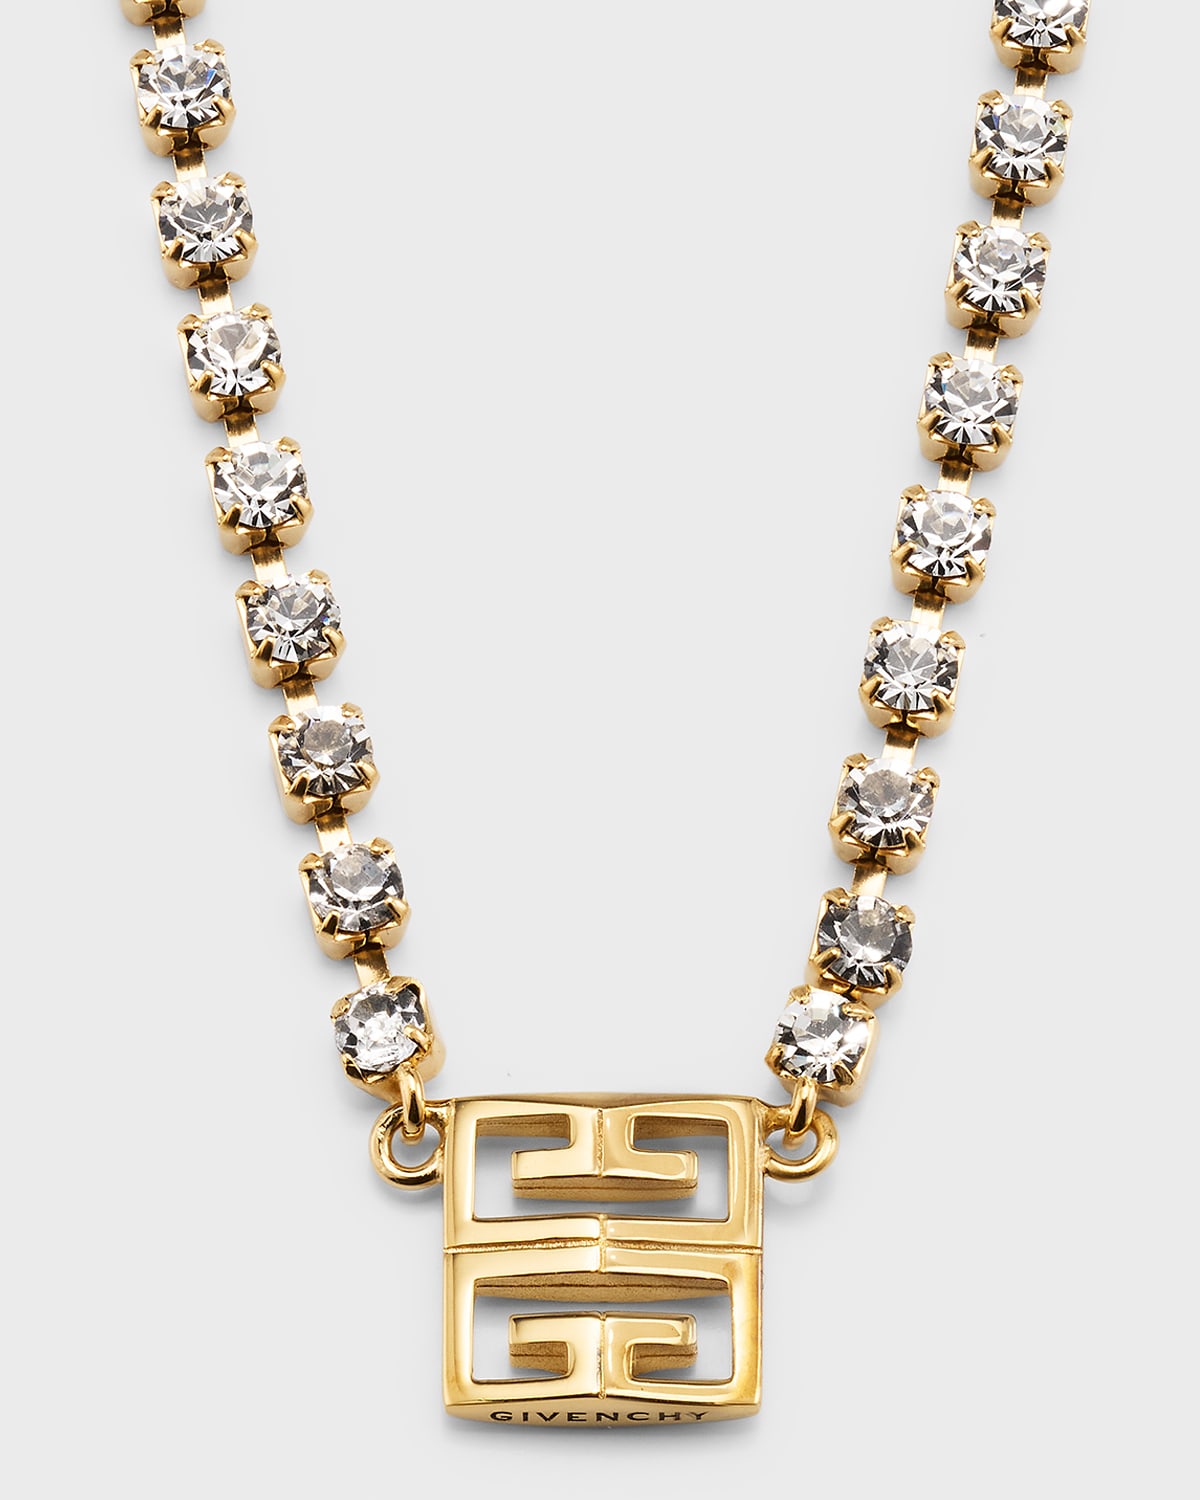 4G Golden Pendant Necklace with Crystals